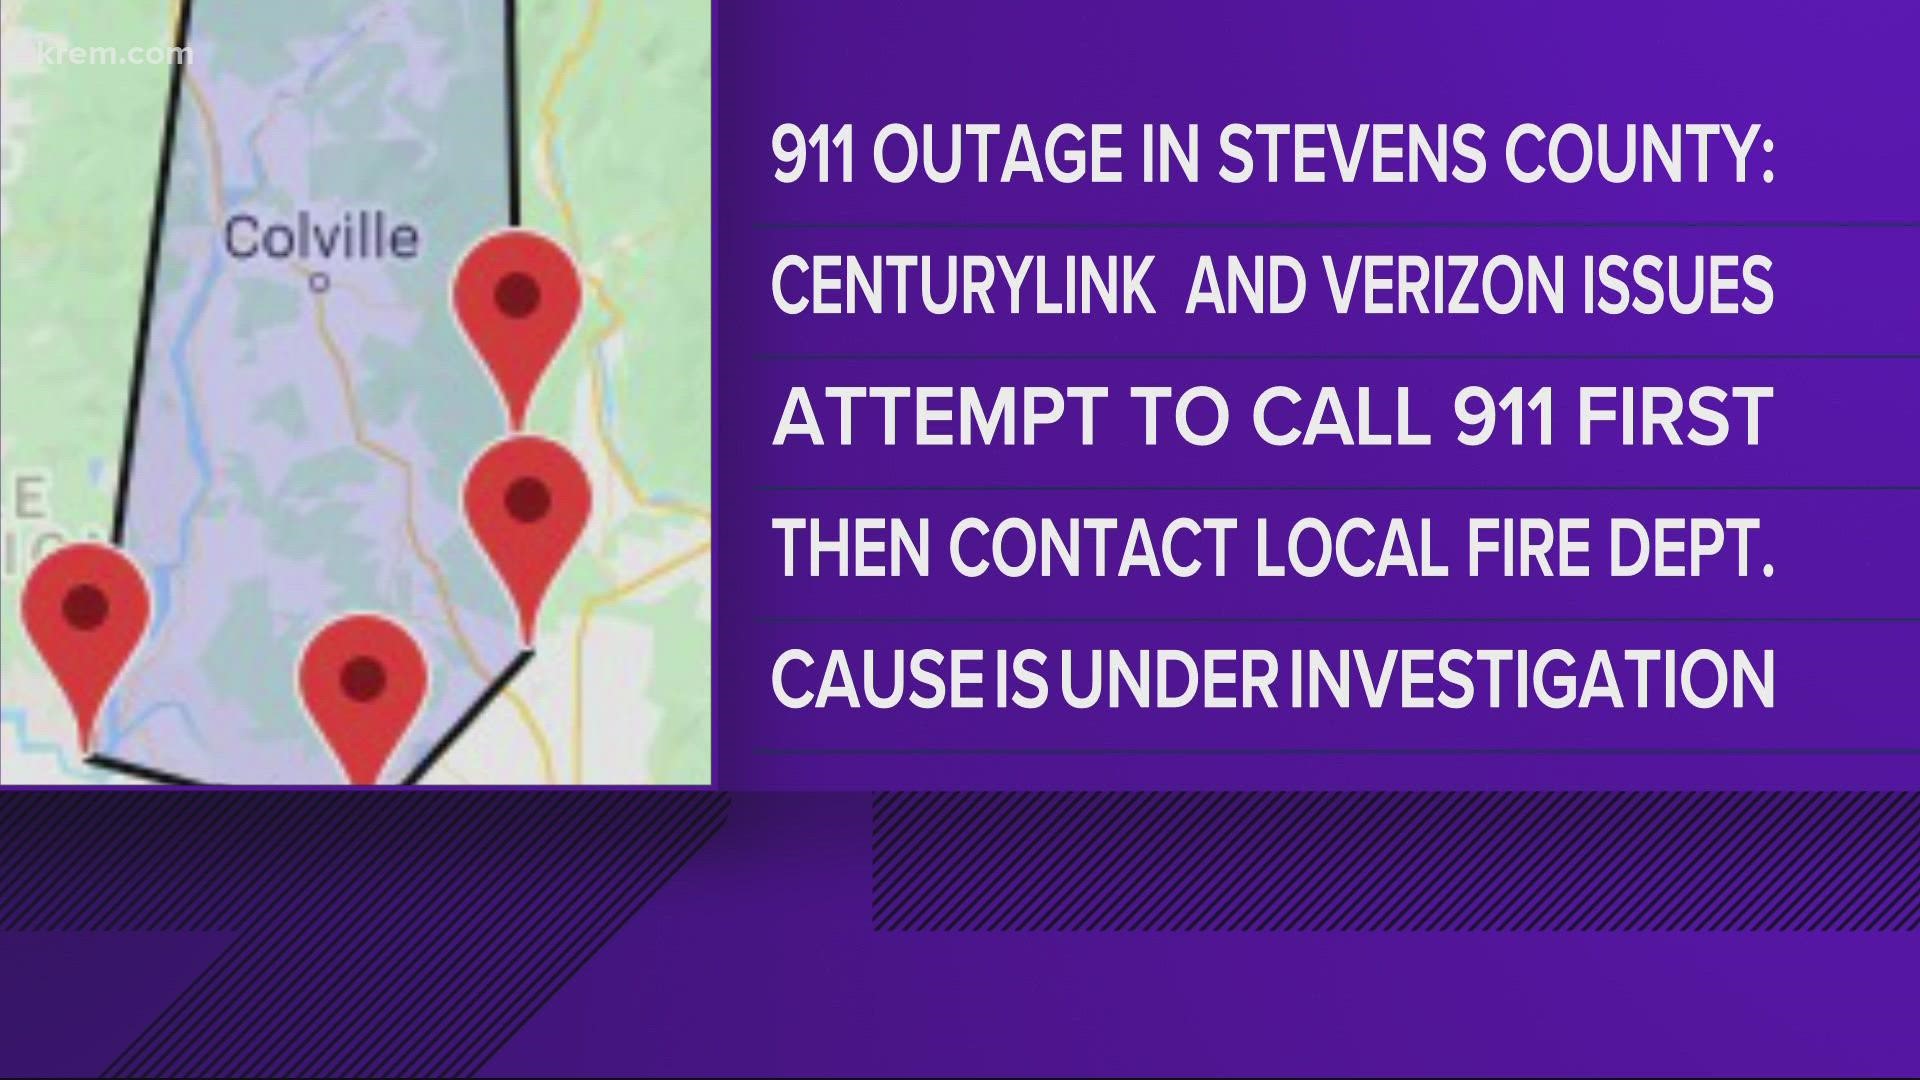 According to Stevens County Sheriff's Office they are currently investigating what is causing the outage.